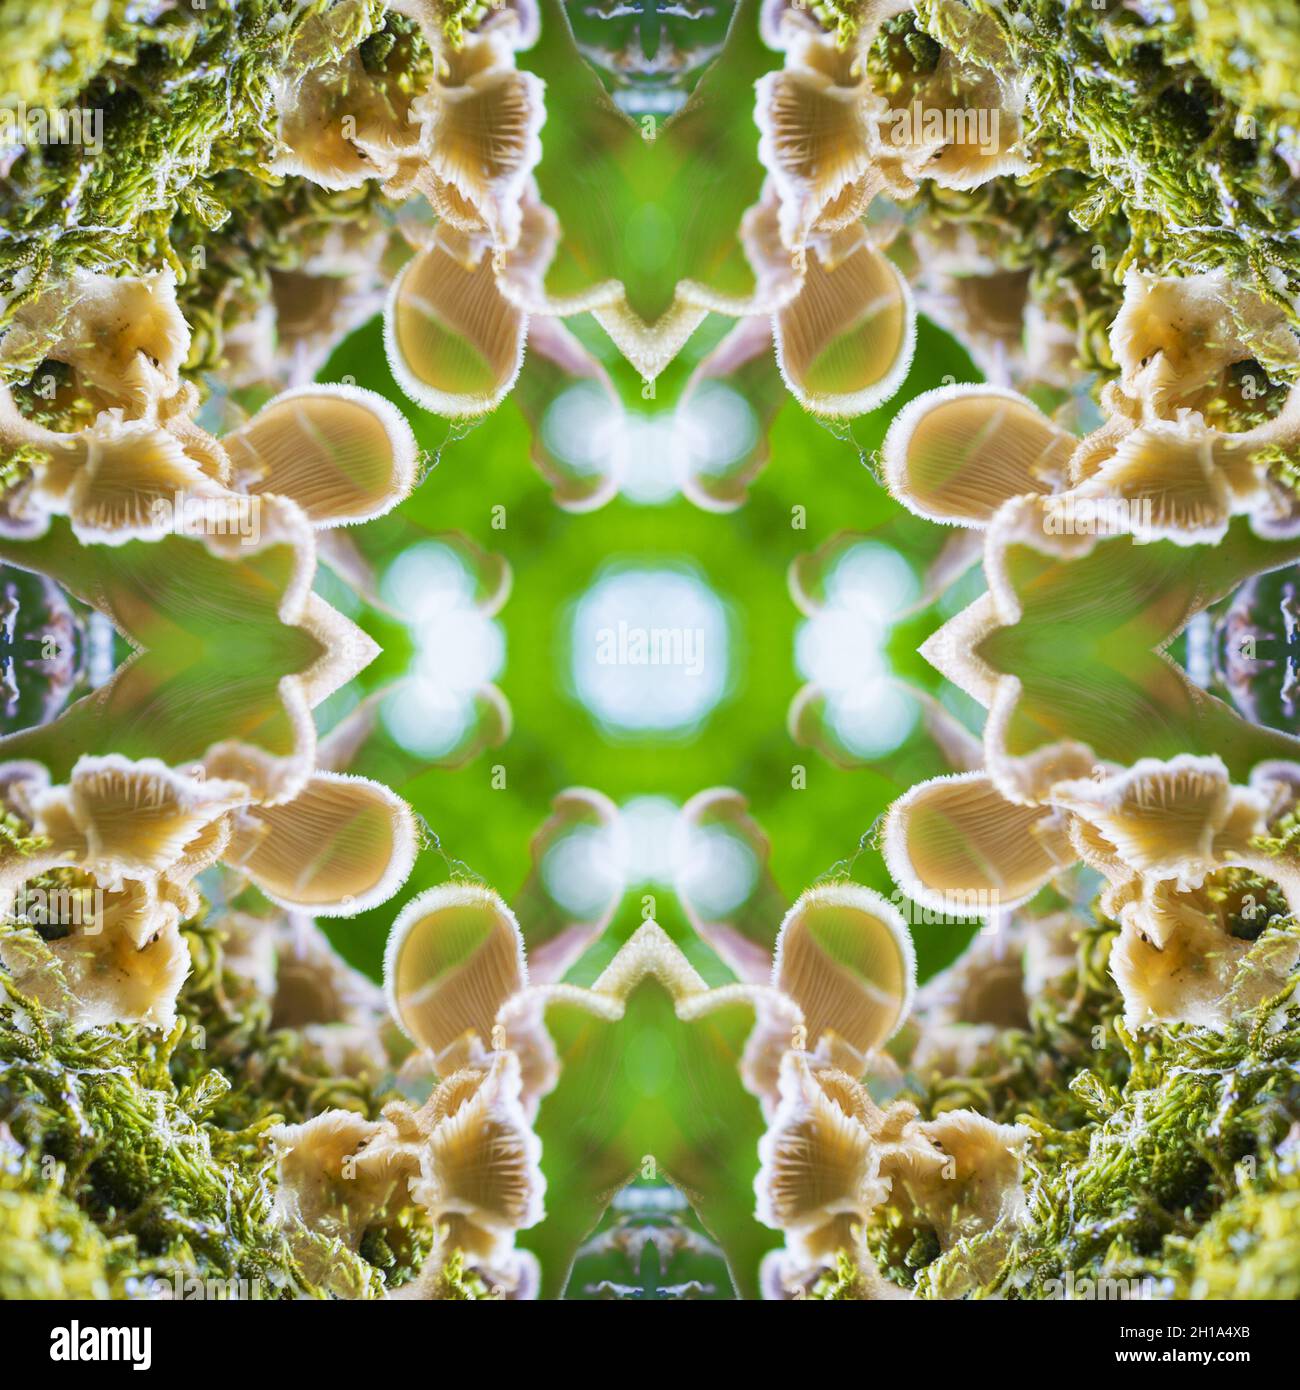 Fractal Patterns in Nature and Art Are Aesthetically Pleasing and